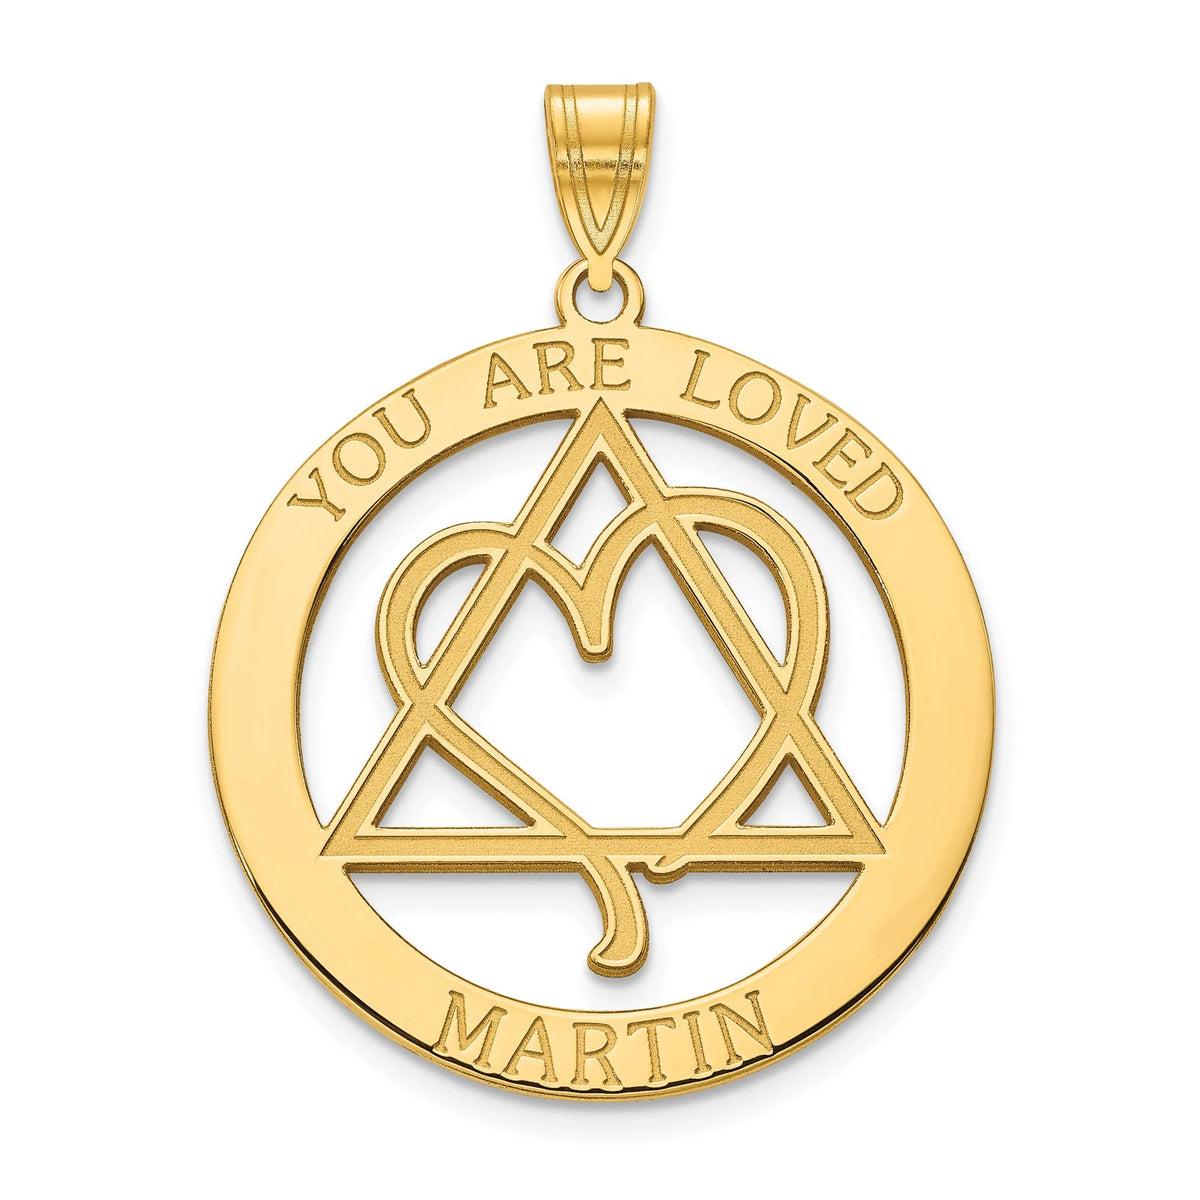 Adoption Pendant Necklace in Solid Sterling Silver or Gold Plated Sterling Silver - Gift Box Included - You Are Loved Pendant -